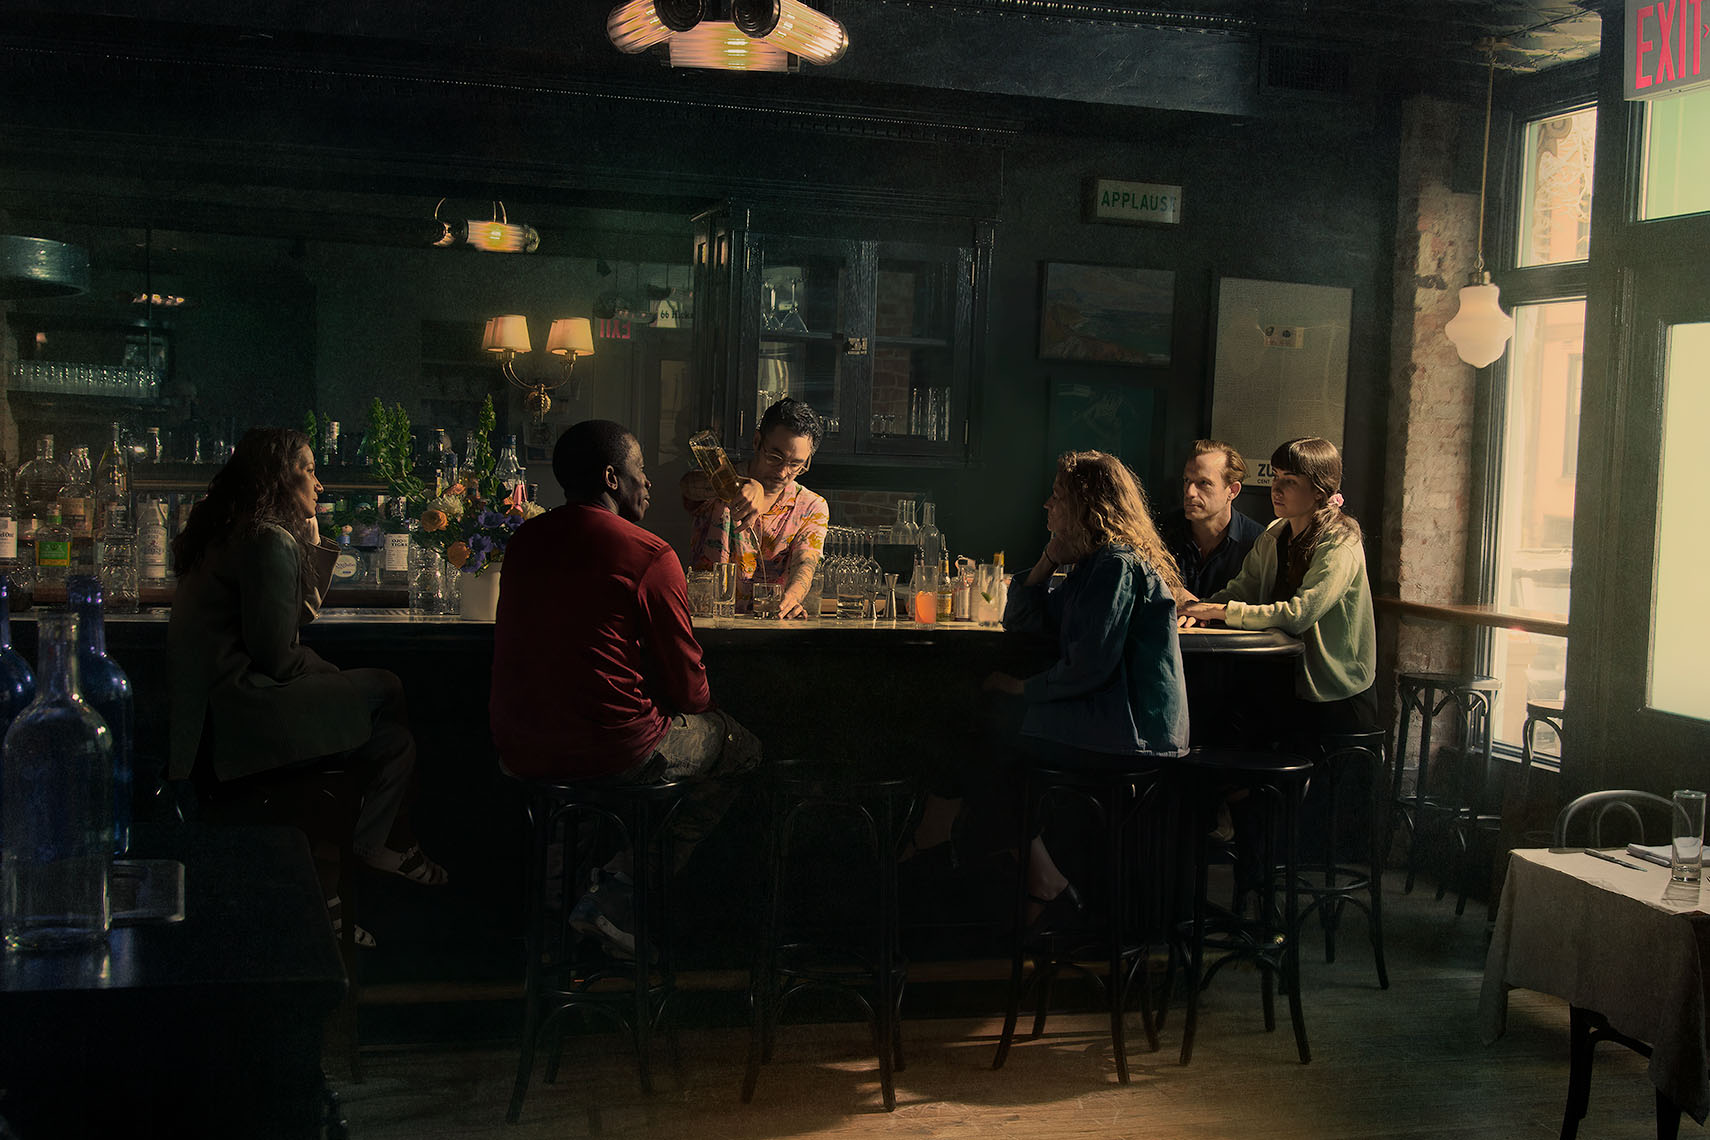 Small group of attractive people in their twenties and thirties enjoying drinks in an old-fashioned bar in the late afternoon.